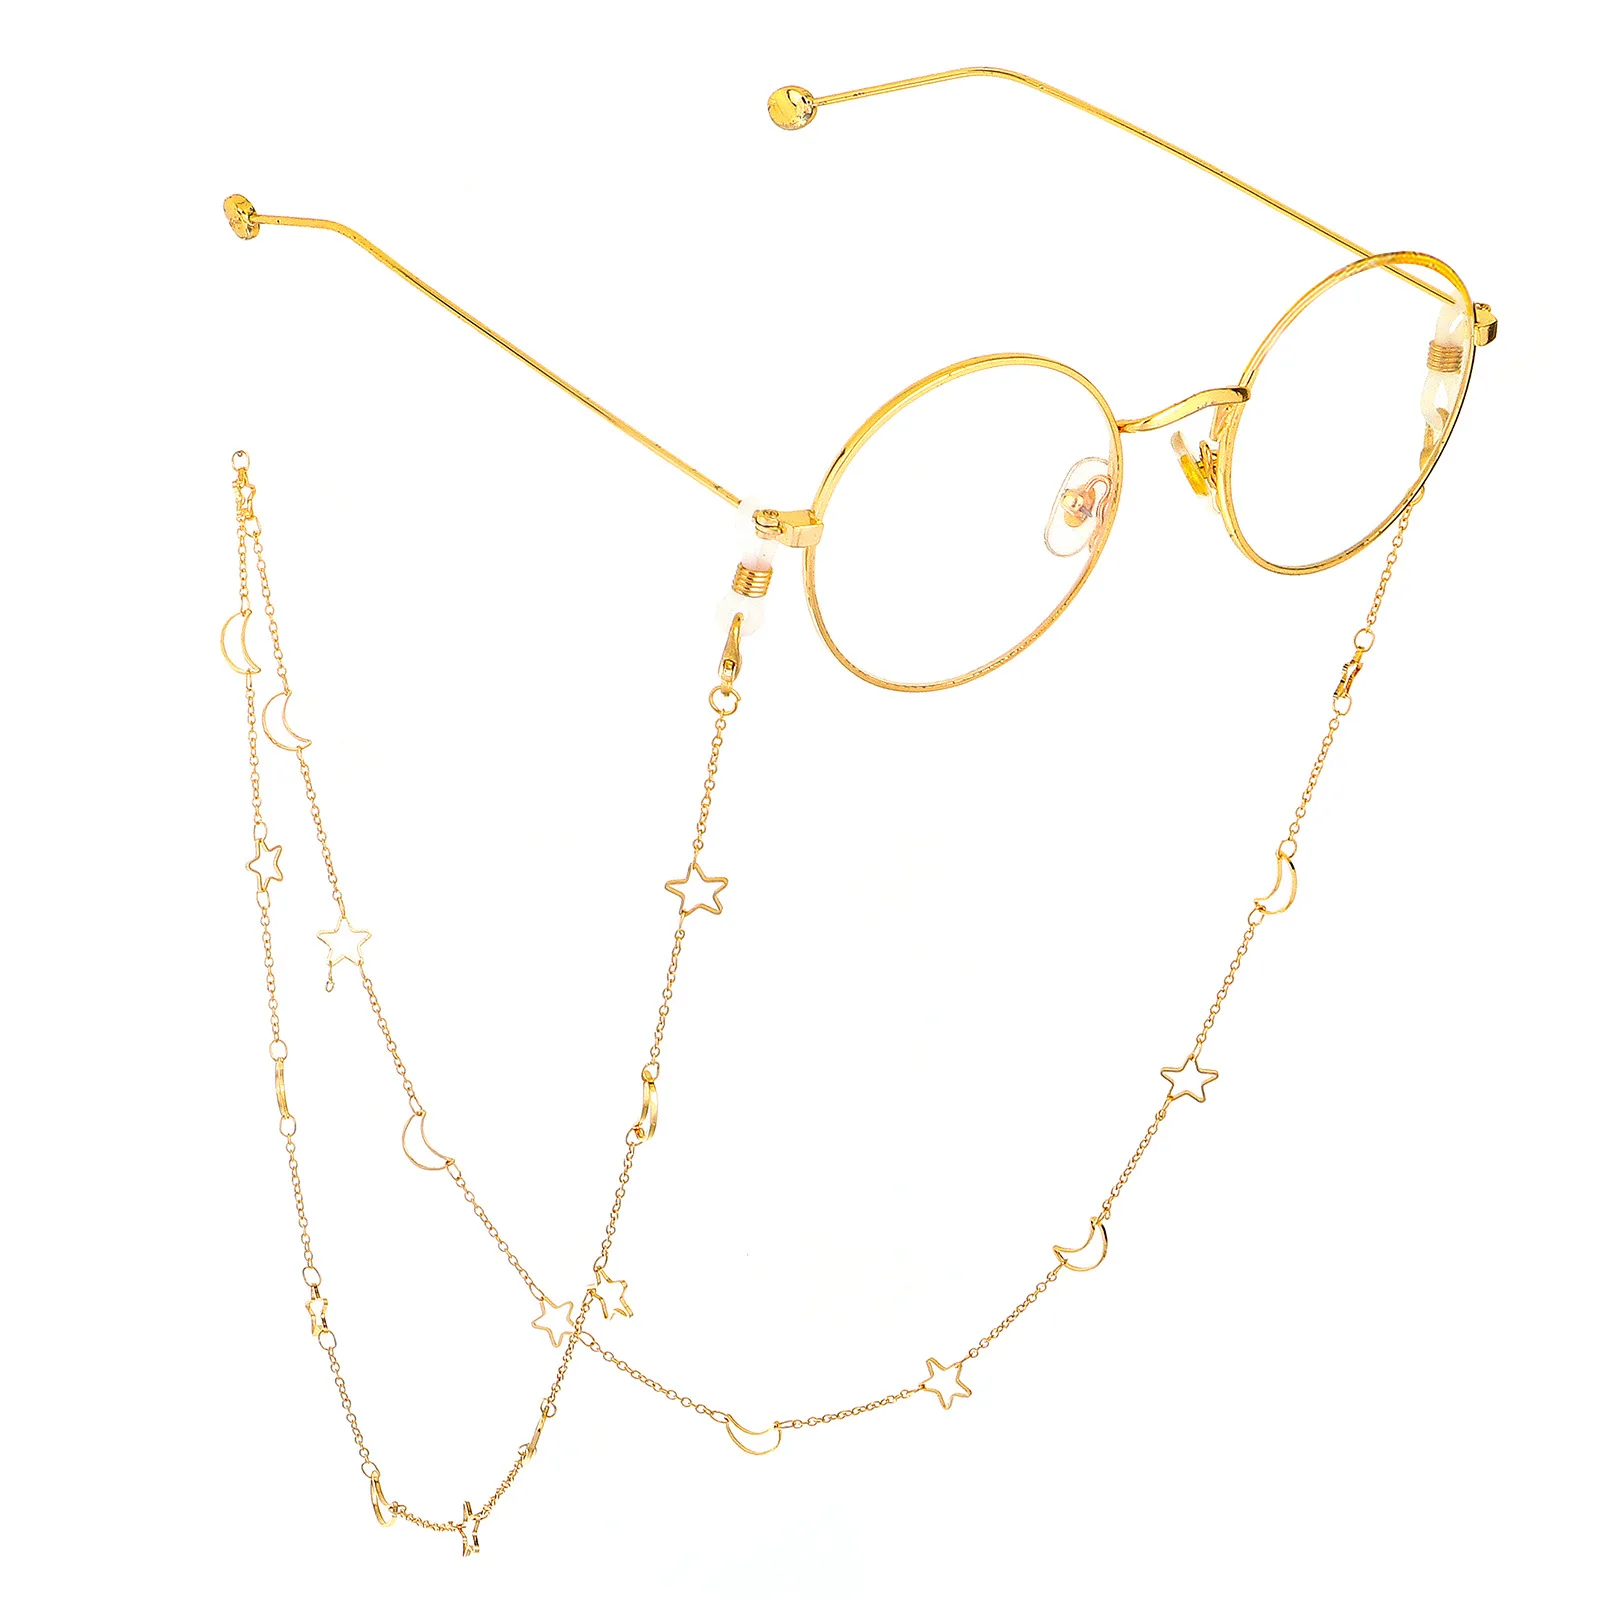 Glasses Glasses Chain Eyeglass Lanyard  Glasses Necklace  Eye wear Accessories